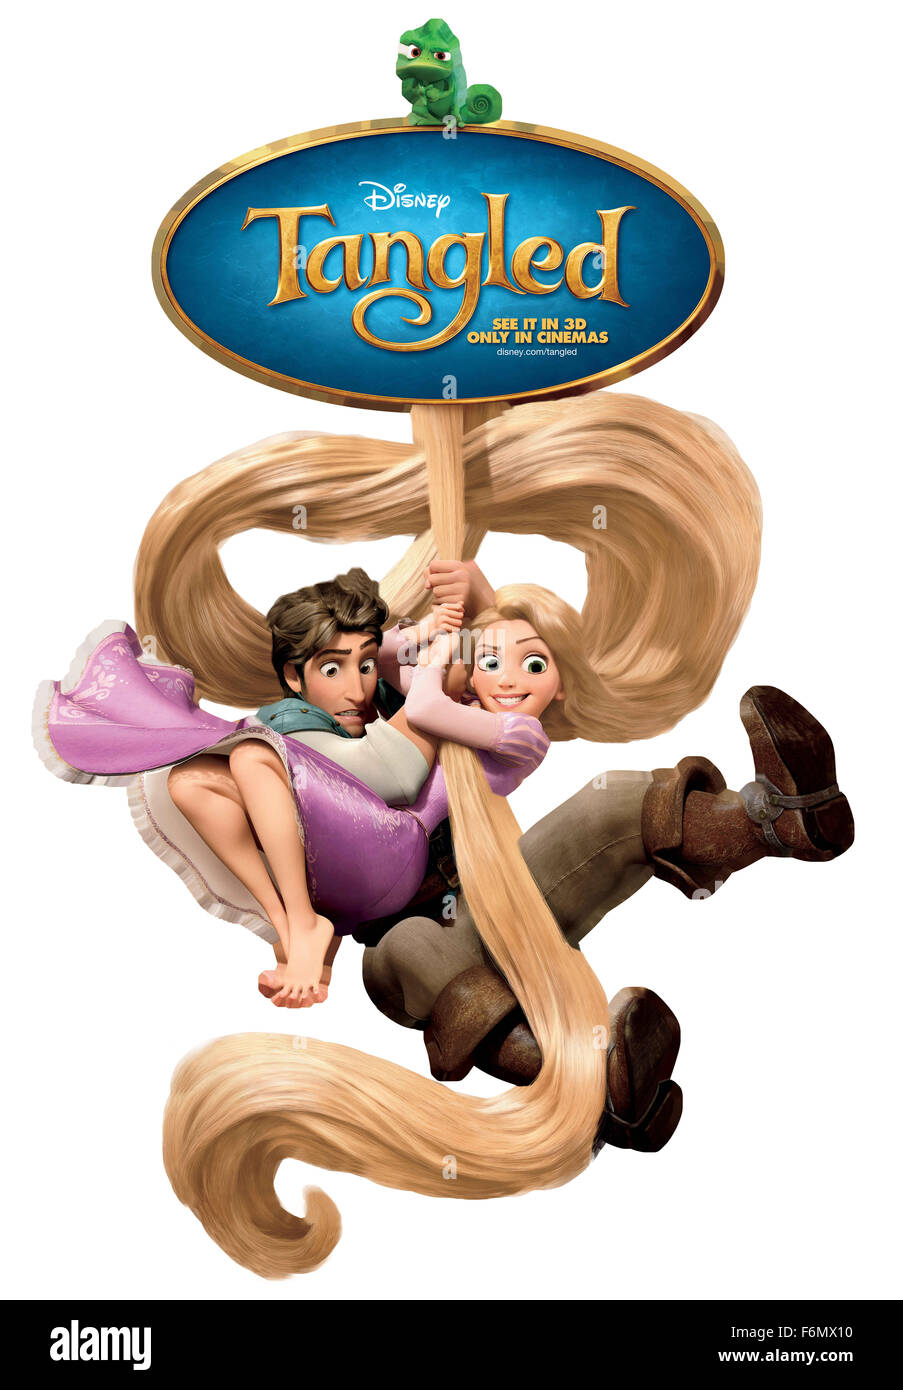 RELEASE DATE: November 24, 2010. MOVIE TITLE: Tangled. STUDIO: Walt Disney.  PLOT: The long-haired Princess Rapunzel has spent her entire life in a  tower, but when she falls in love with a